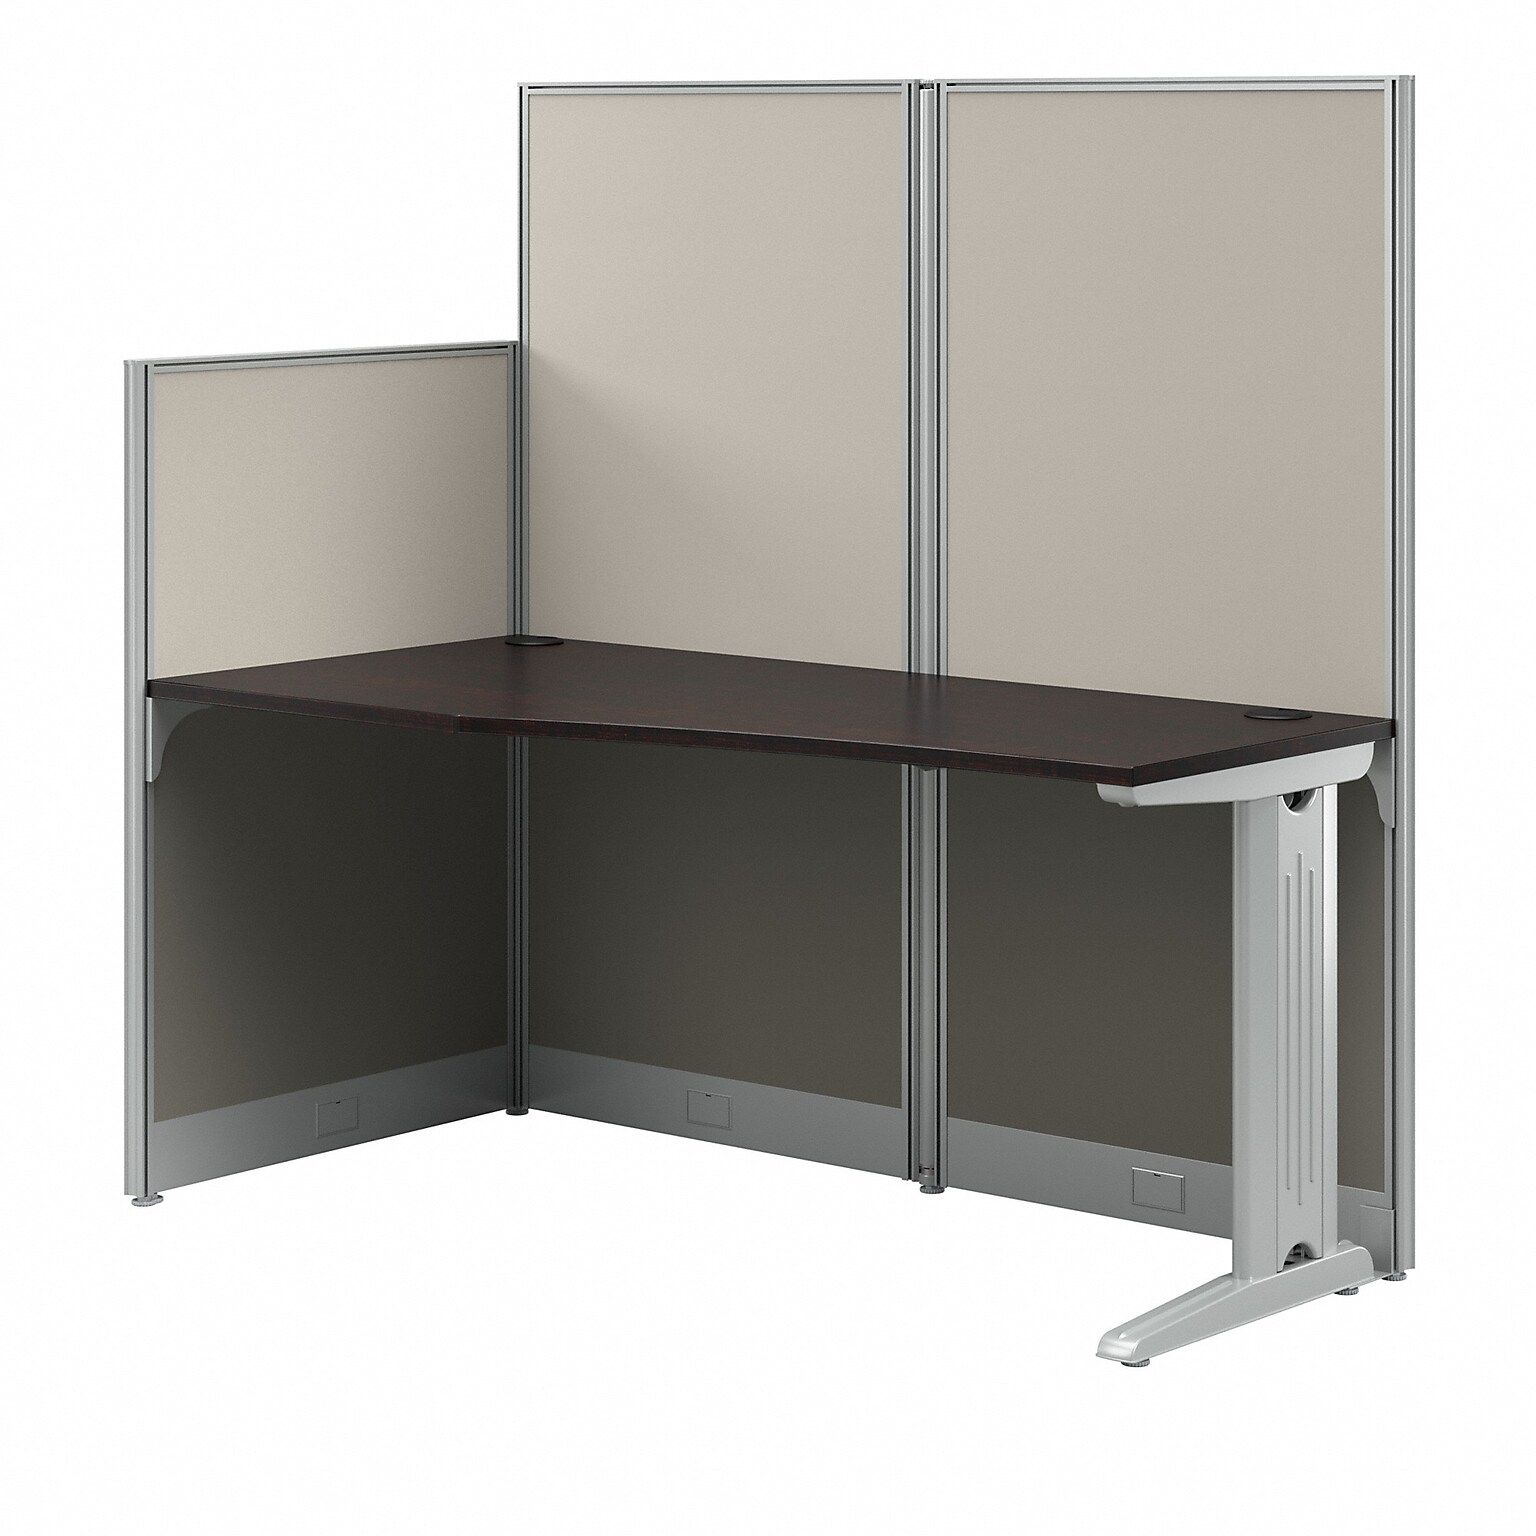 Bush Business Furniture Office in an Hour 63H x 65W Cubicle Workstation, Mocha Cherry (WC36892-03K)